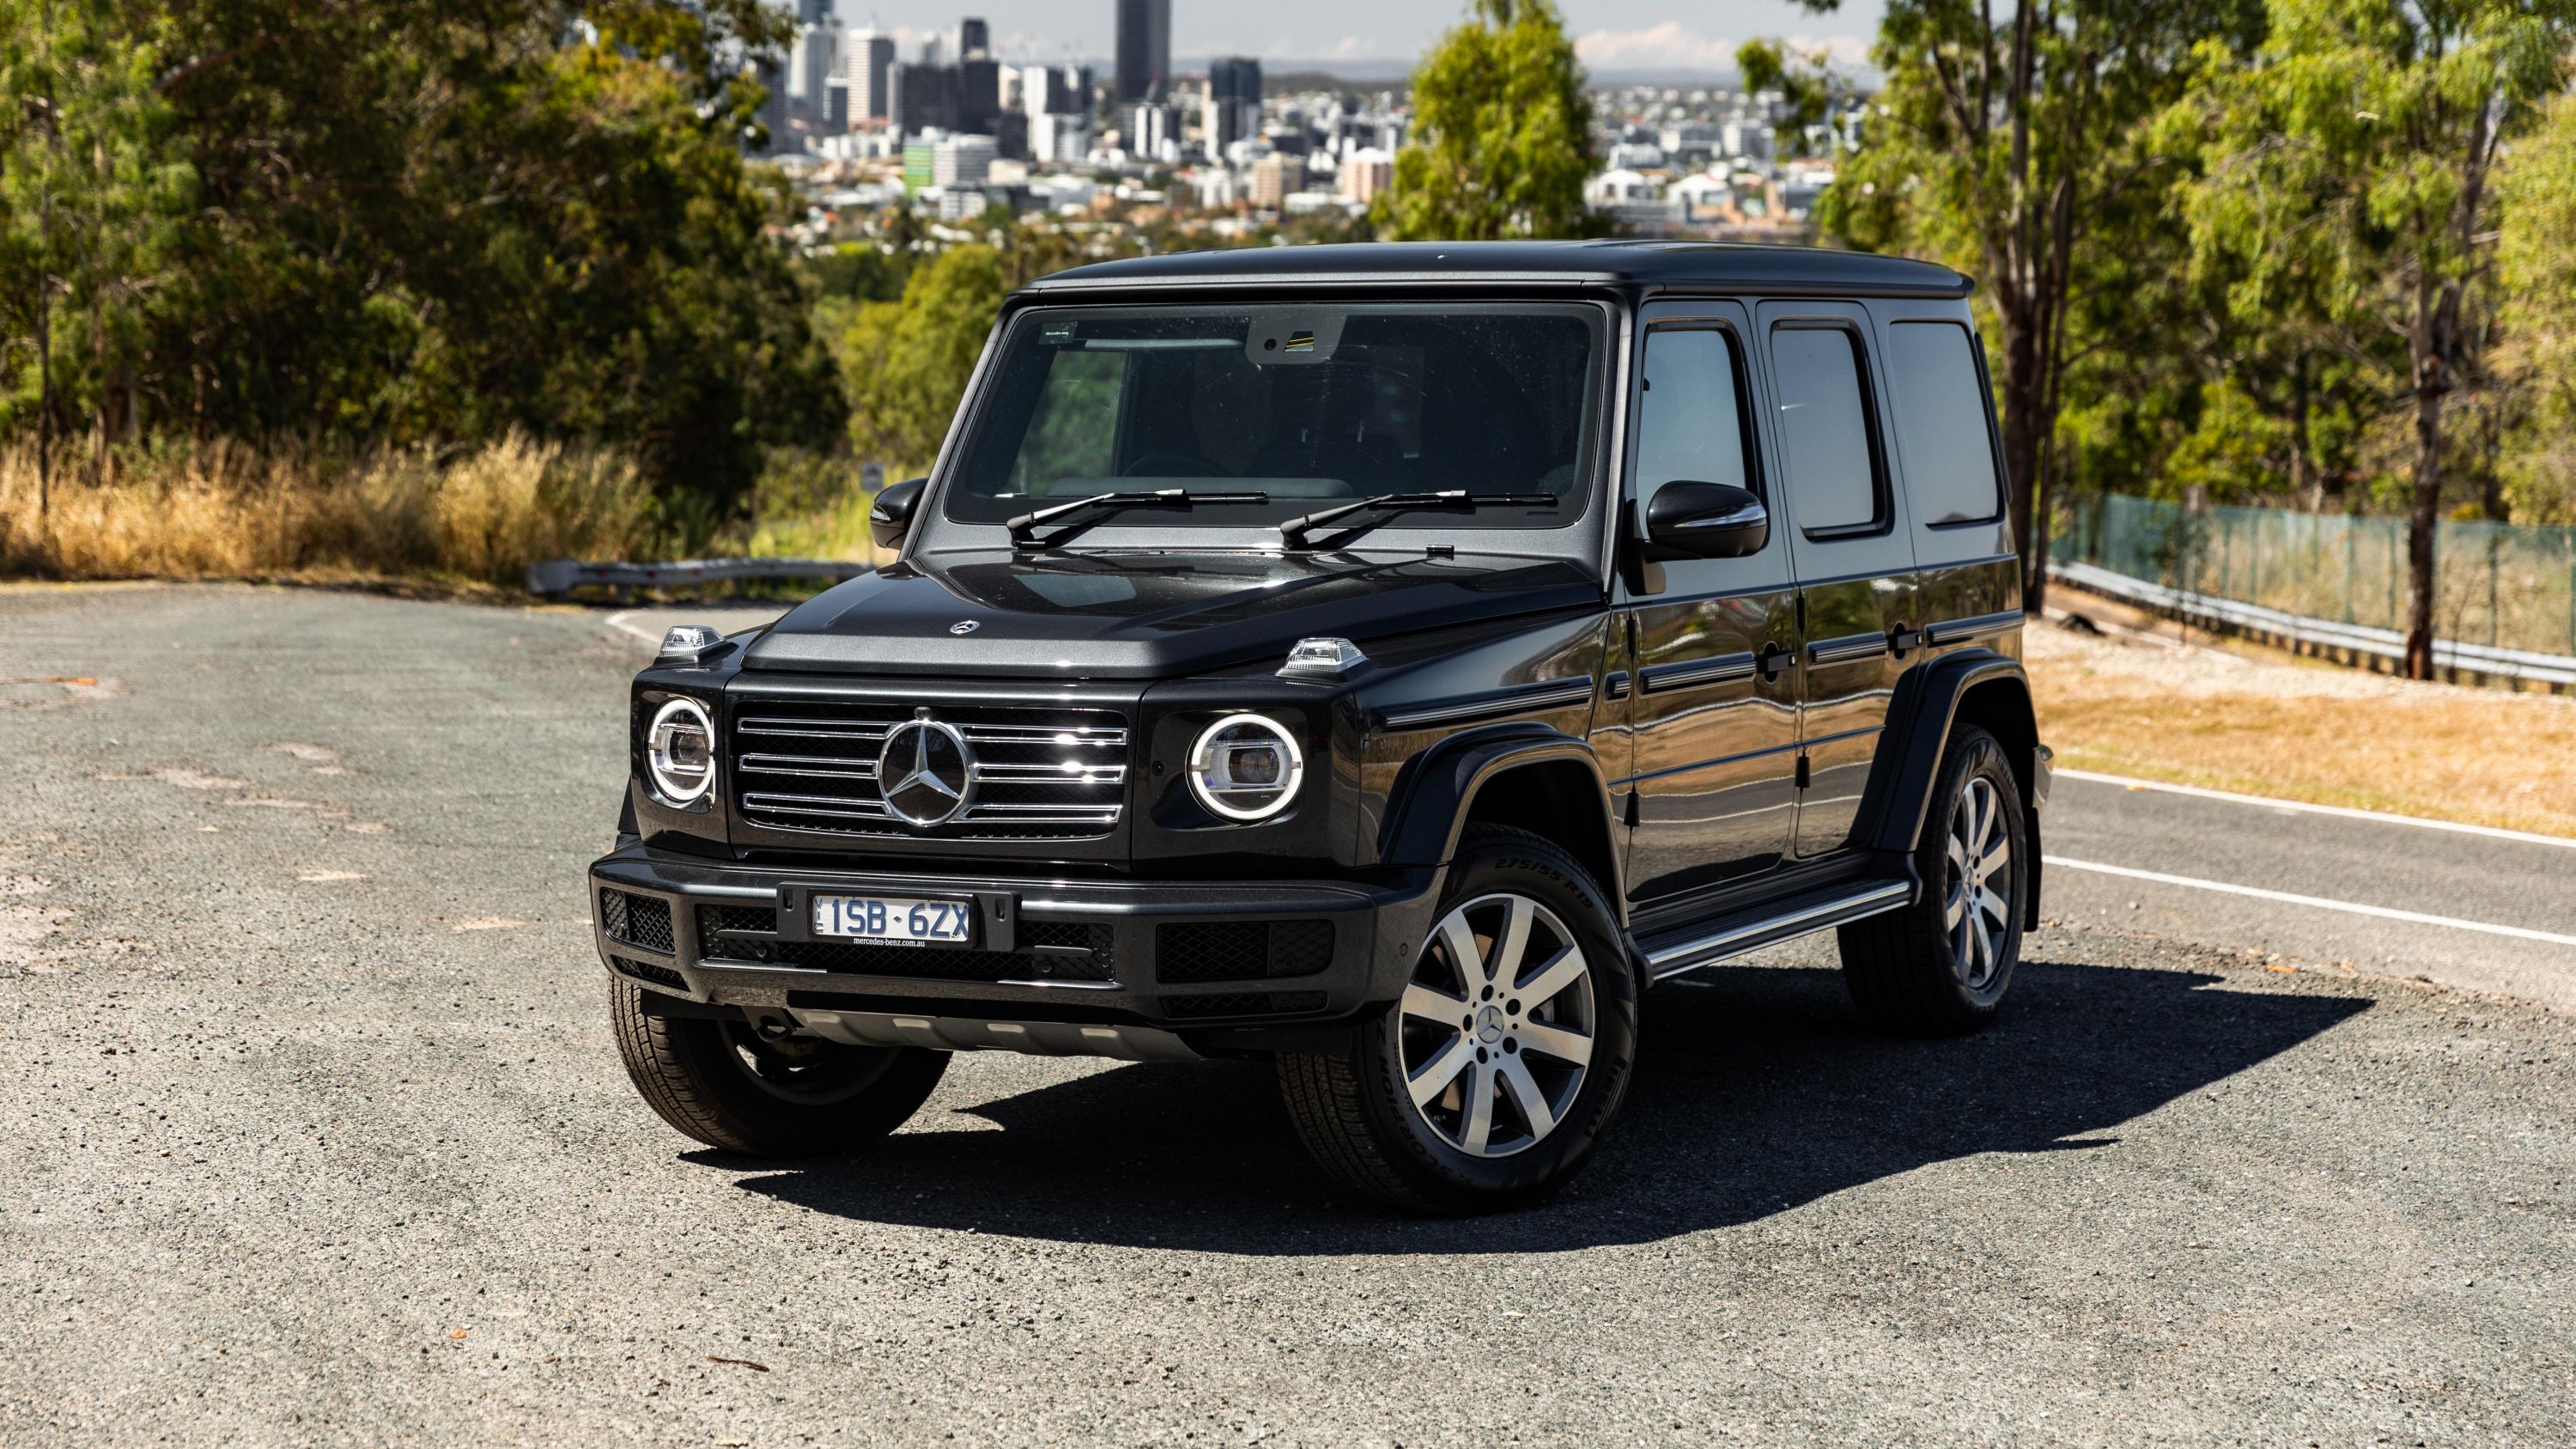 G class gold edition  Luxury cars, Super cars, Mercedes benz cars